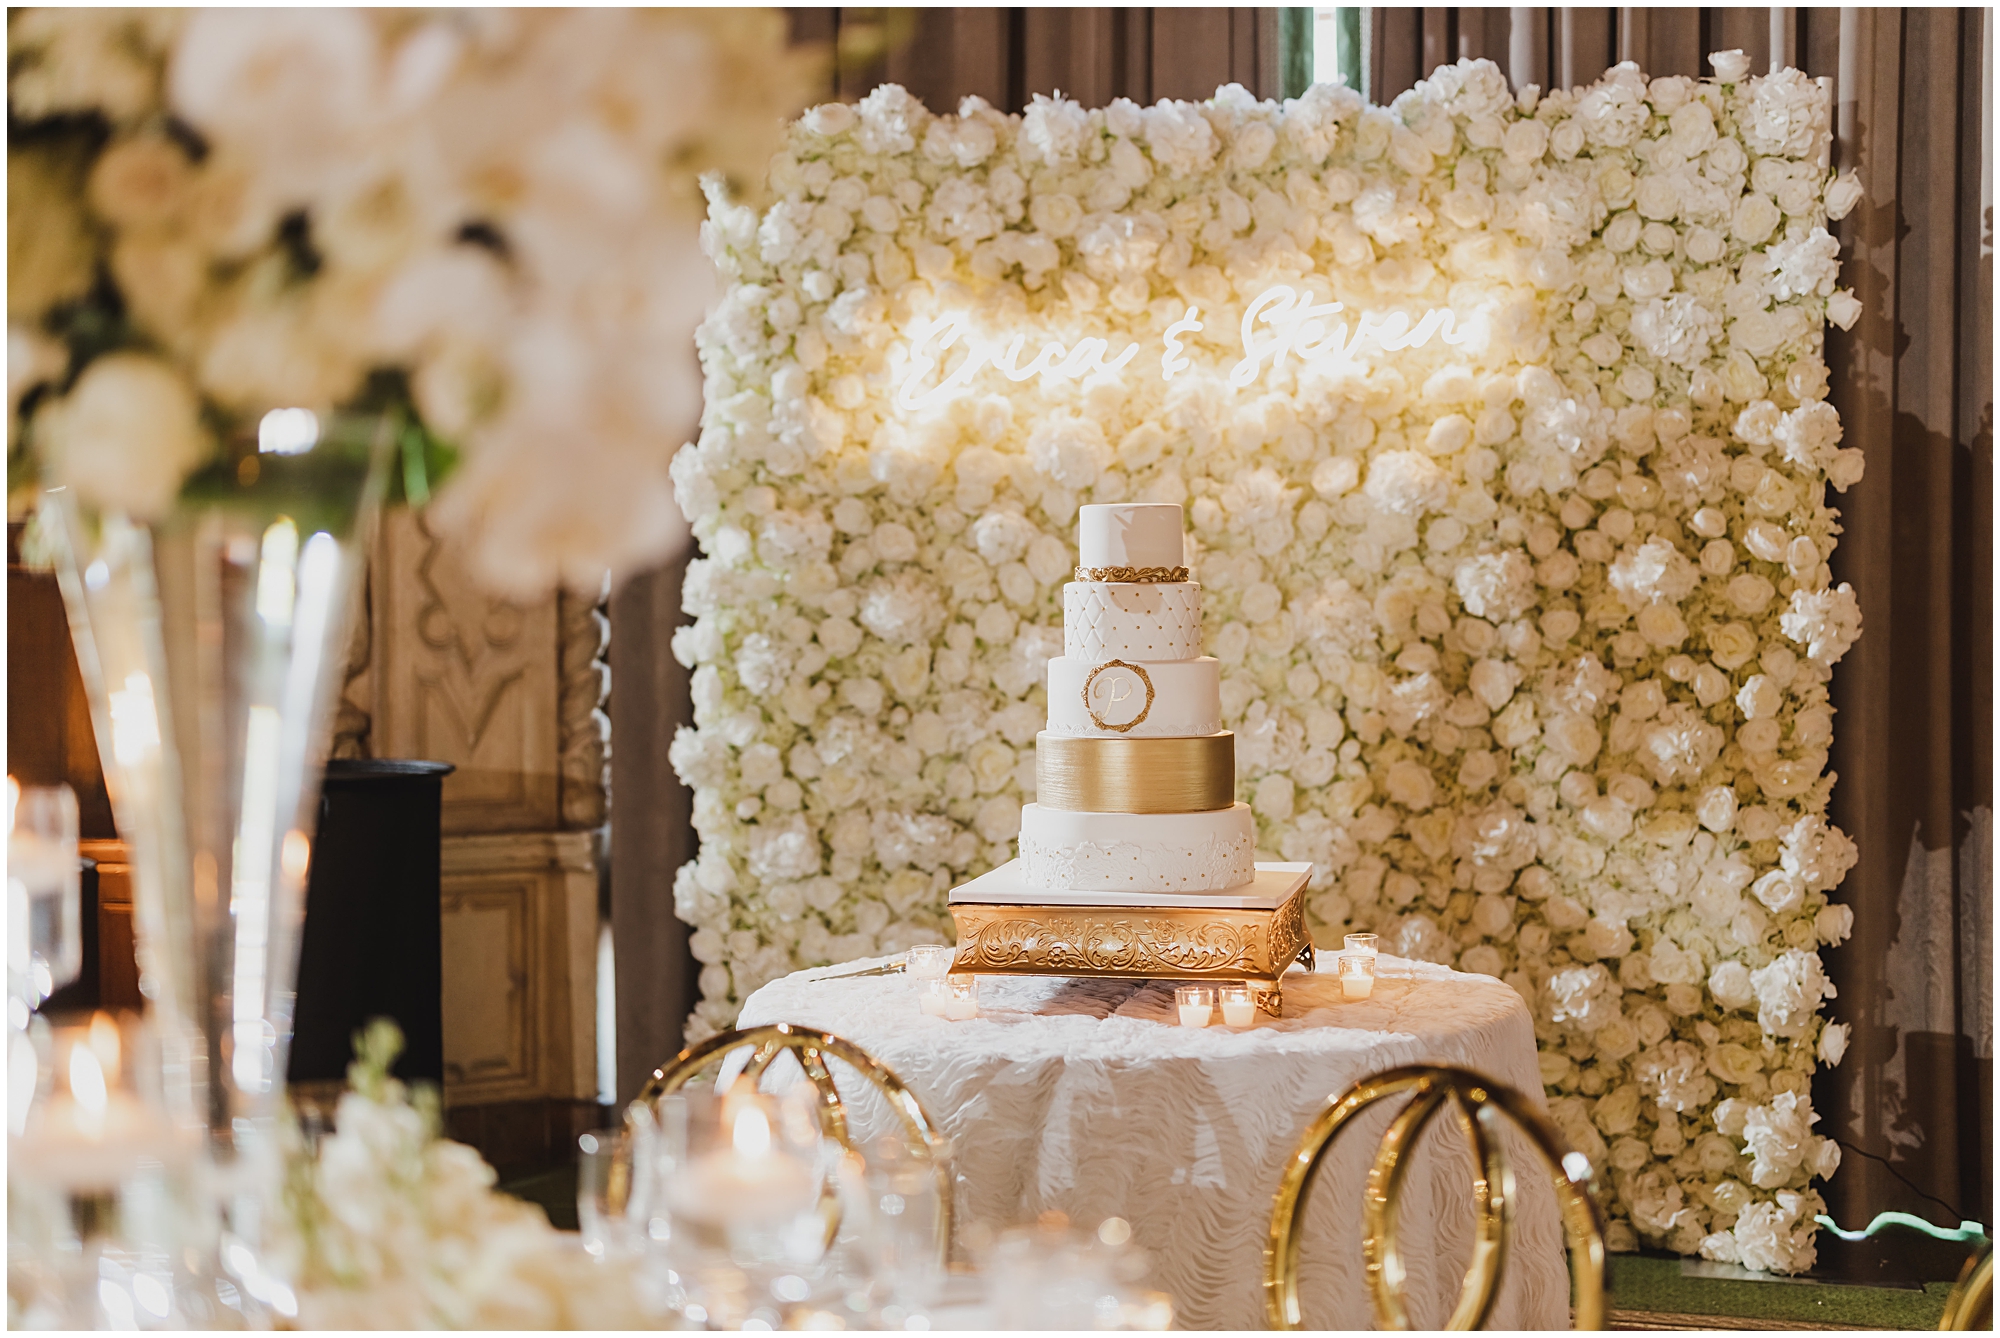 White and gold cake in front of a flower wall under a neon sign.